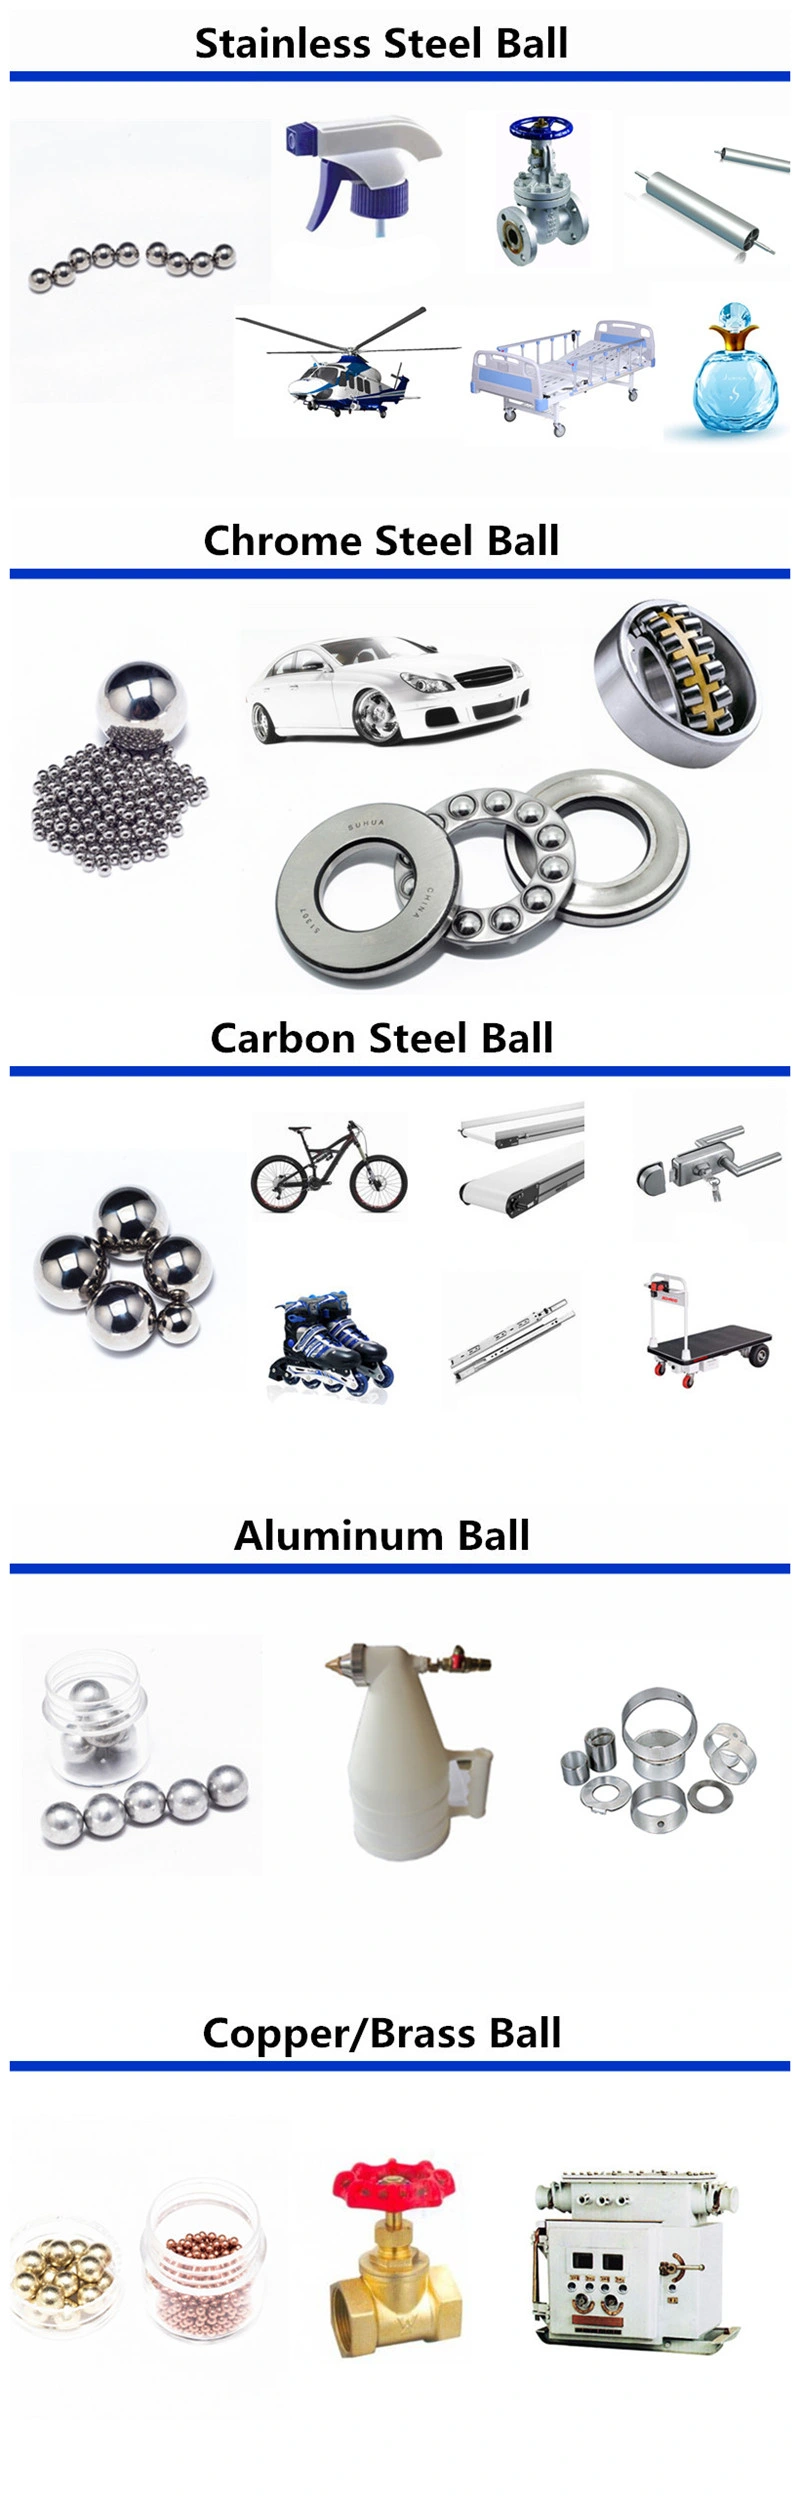 20mm Stainless Steel Ball 440 440c Stainless Ball